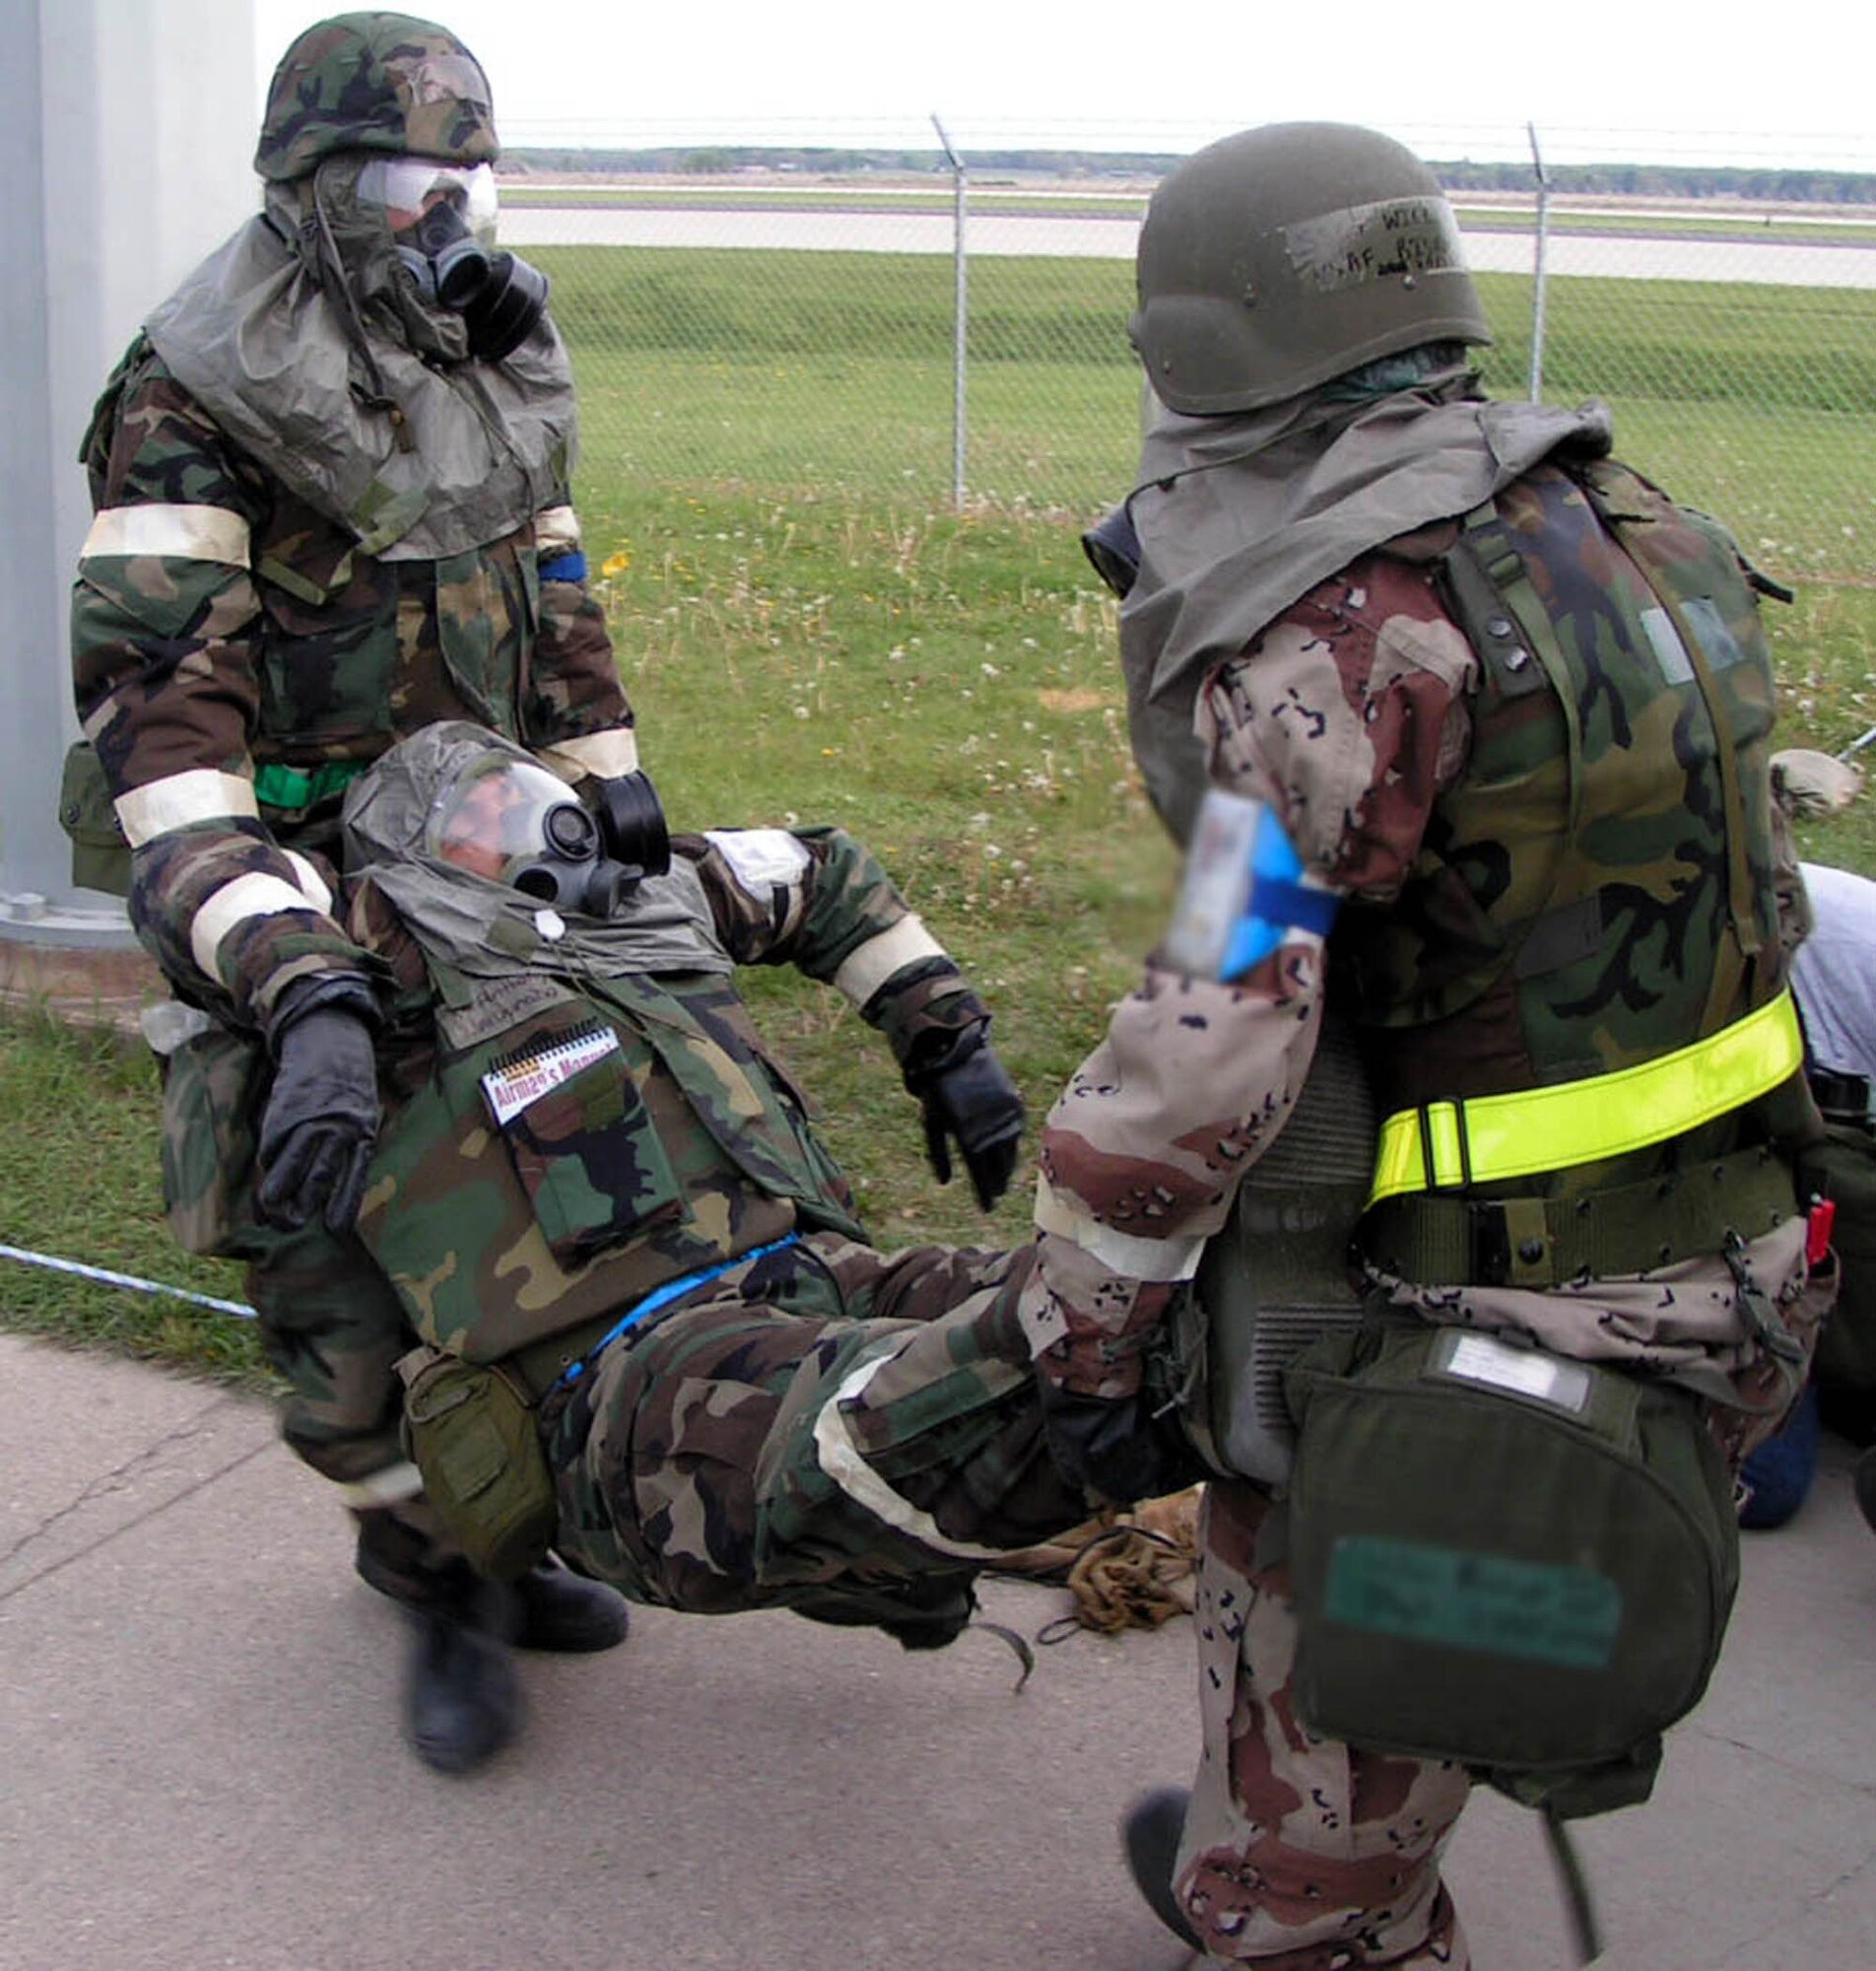 Airmen practice Self Aid and Buddy Care techniques during an exercise. SABC is commonly used by the military in deployed environments where there is a constant threat of serious bodily injury from improvised explosive devices, bombs and mortars. (U.S. Air Force photo)